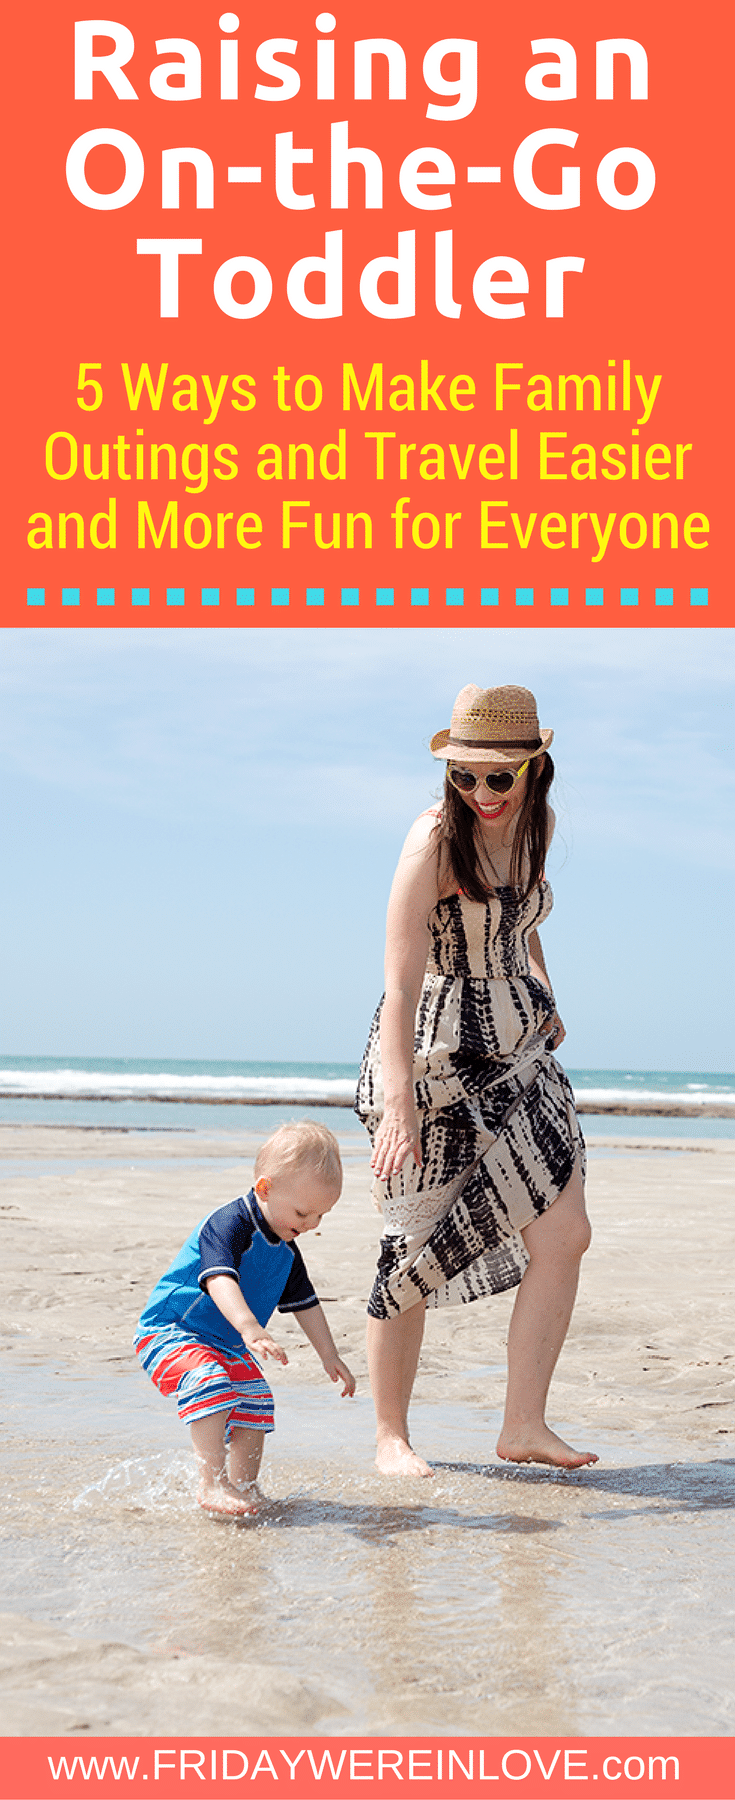 5 Ways to Make Family Outings and Travel Easier and More Fun For Everyone